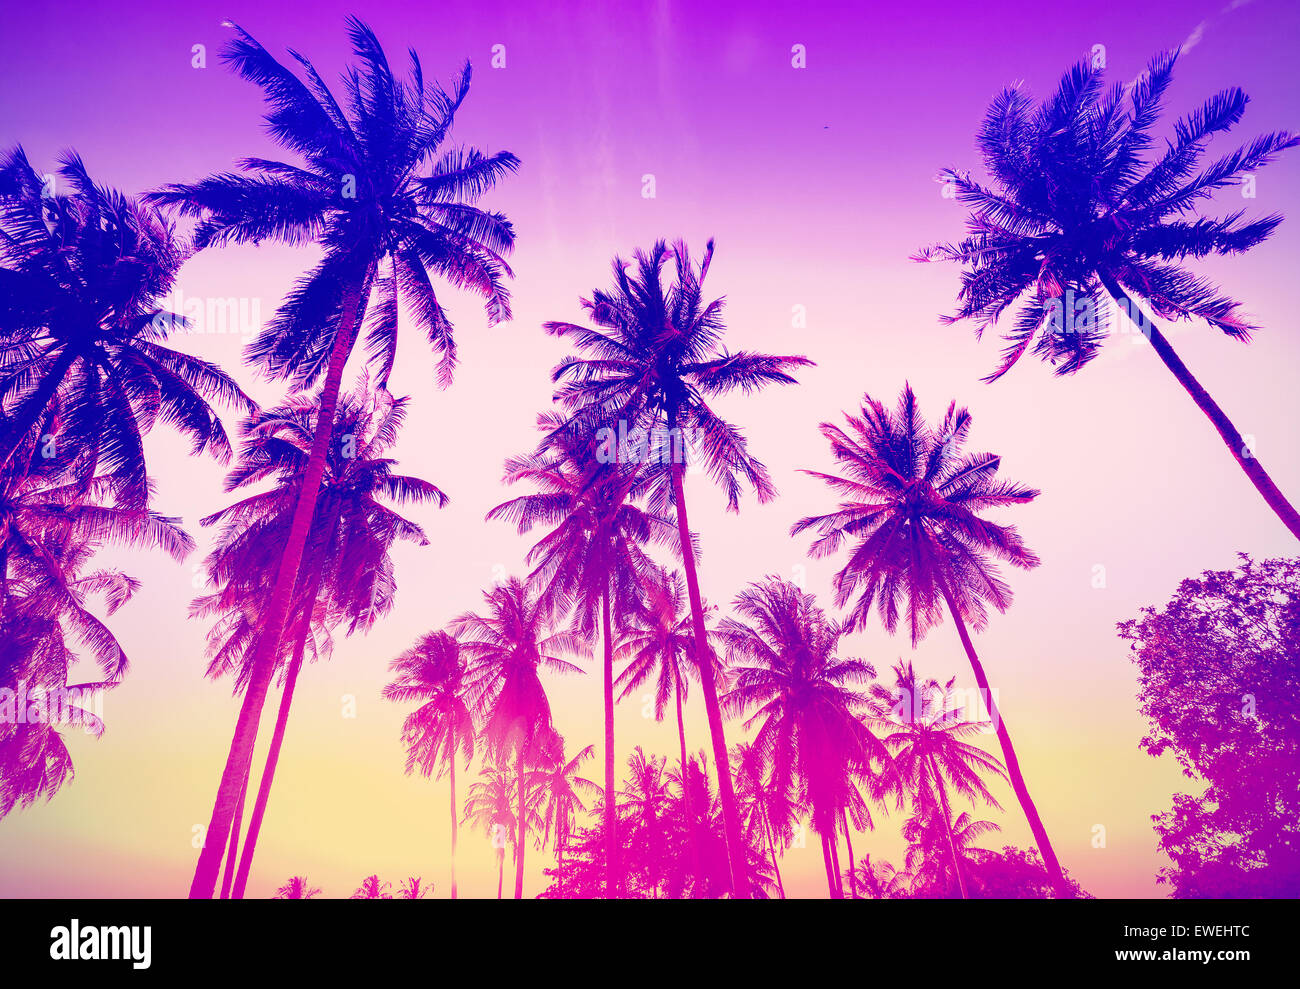 Vintage toned palm trees silhouettes at sunset. Stock Photo